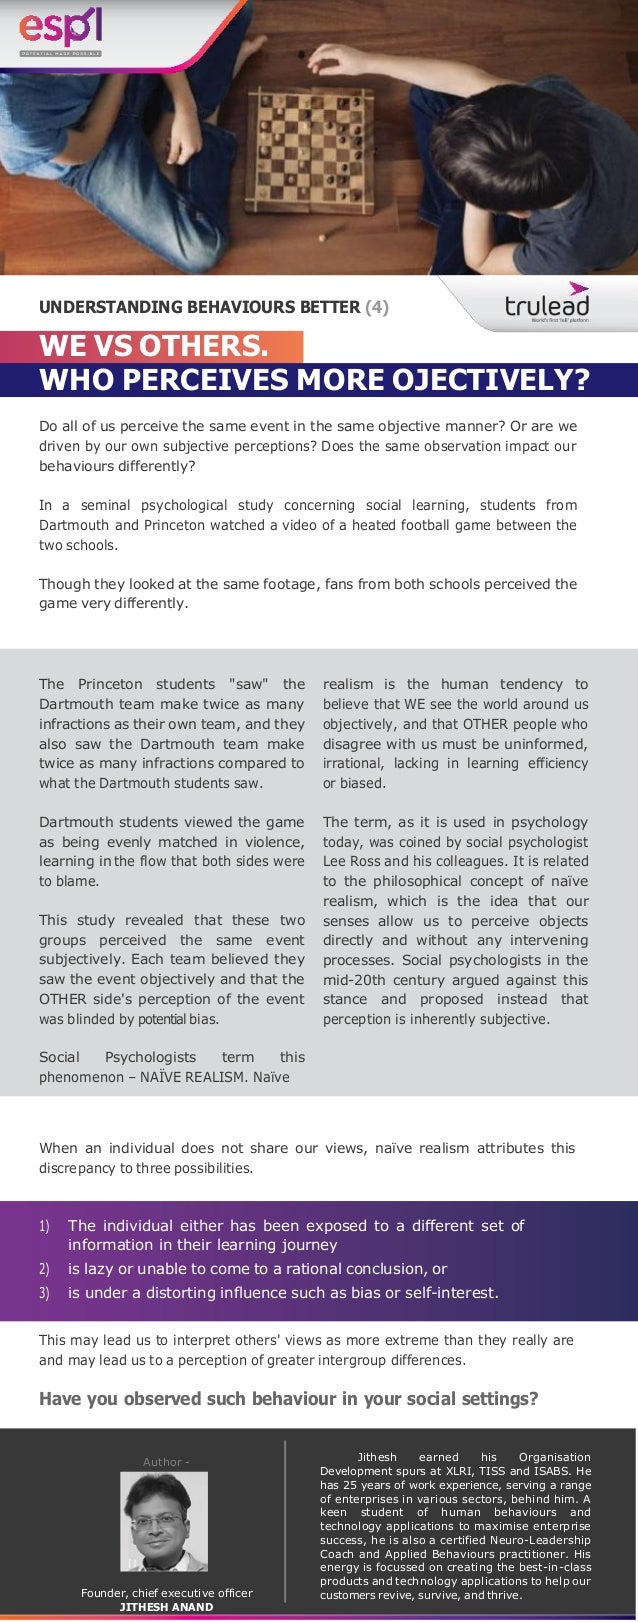 WE VS OTHERS.
WHO PERCEIVES MORE OJECTIVELY?
Do all of us perceive the same event in the same objective manner? Or are we
driven by our own subjective perceptions? Does the same observation impact our
behaviours differently?
In a seminal psychological study concerning social learning, students from
Dartmouth and Princeton watched a video of a heated football game between the
two schools.
Though they looked at the same footage, fans from both schools perceived the
game very differently.
The Princeton students "saw" the
Dartmouth team make twice as many
infractions as their own team, and they
also saw the Dartmouth team make
twice as many infractions compared to
what the Dartmouth students saw.
Dartmouth students viewed the game
as being evenly matched in violence,
learning in the flow that both sides were
to blame.
This study revealed that these two
groups perceived the same event
subjectively. Each team believed they
saw the event objectively and that the
OTHER side's perception of the event
was blinded by potential bias.
Social Psychologists term this
phenomenon – NAÏVE REALISM. Naïve
realism is the human tendency to
believe that WE see the world around us
objectively, and that OTHER people who
disagree with us must be uninformed,
irrational, lacking in learning efficiency
or biased.
The term, as it is used in psychology
today, was coined by social psychologist
Lee Ross and his colleagues. It is related
to the philosophical concept of naïve
realism, which is the idea that our
senses allow us to perceive objects
directly and without any intervening
processes. Social psychologists in the
mid-20th century argued against this
stance and proposed instead that
perception is inherently subjective.
When an individual does not share our views, naïve realism attributes this
discrepancy to three possibilities.
This may lead us to interpret others' views as more extreme than they really are
and may lead us to a perception of greater intergroup differences.
Have you observed such behaviour in your social settings?
Author -
Founder, chief executive officer
JITHESH ANAND
Jithesh earned his Organisation
Development spurs at XLRI, TISS and ISABS. He
has 25 years of work experience, serving a range
of enterprises in various sectors, behind him. A
keen student of human behaviours and
technology applications to maximise enterprise
success, he is also a certified Neuro-Leadership
Coach and Applied Behaviours practitioner. His
energy is focussed on creating the best-in-class
products and technology applications to help our
customers revive, survive, and thrive.
UNDERSTANDING BEHAVIOURS BETTER (4)
1) The individual either has been exposed to a different set of
information in their learning journey
2) is lazy or unable to come to a rational conclusion, or
3) is under a distorting influence such as bias or self-interest.
 